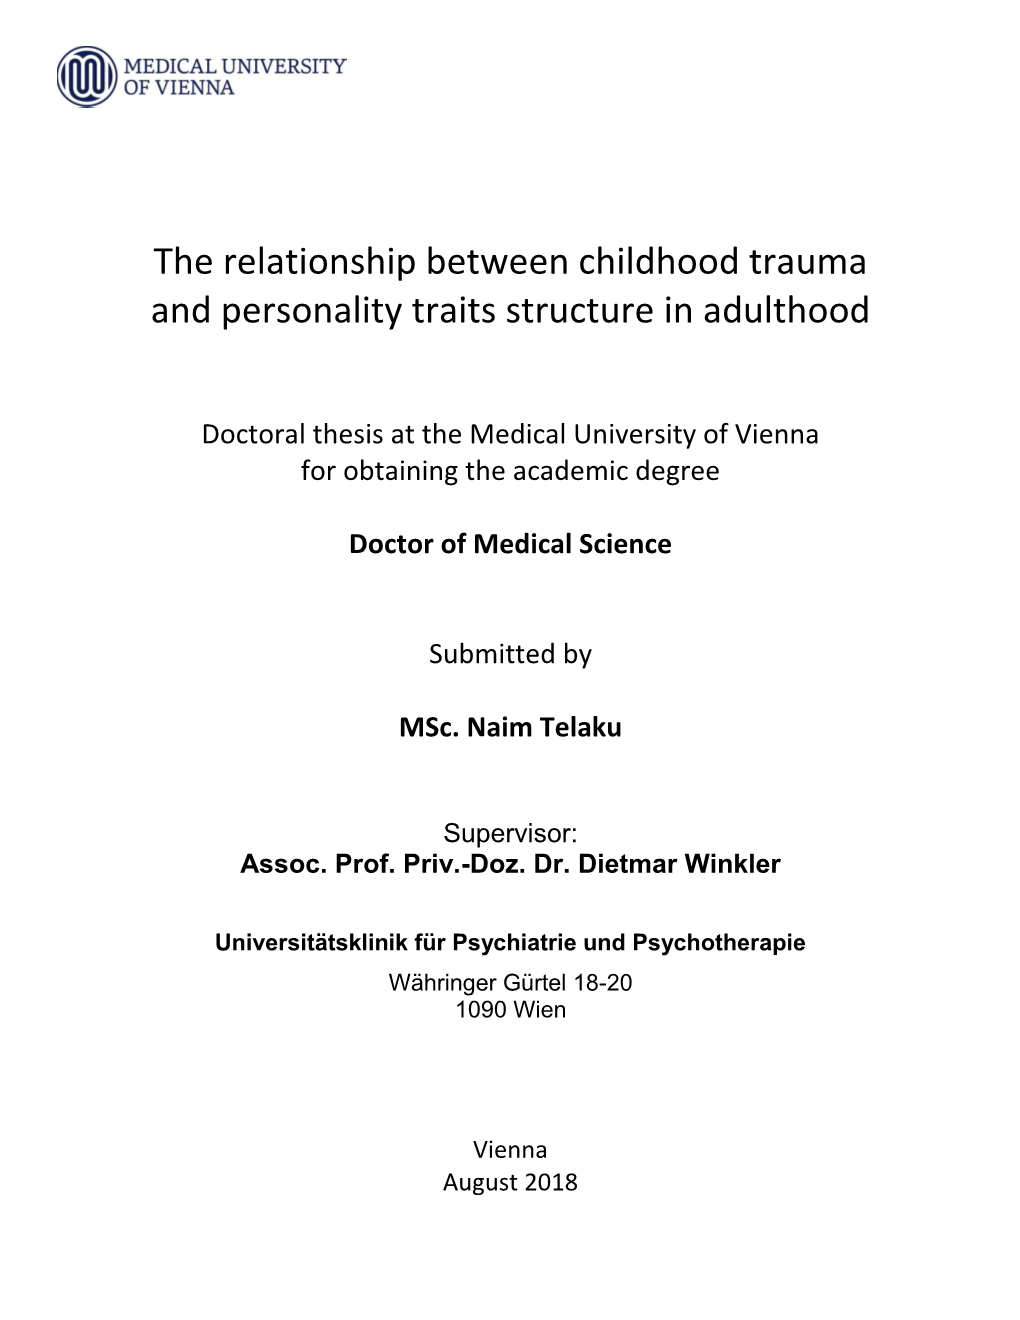 The Relationship Between Childhood Trauma and Personality Traits Structure in Adulthood